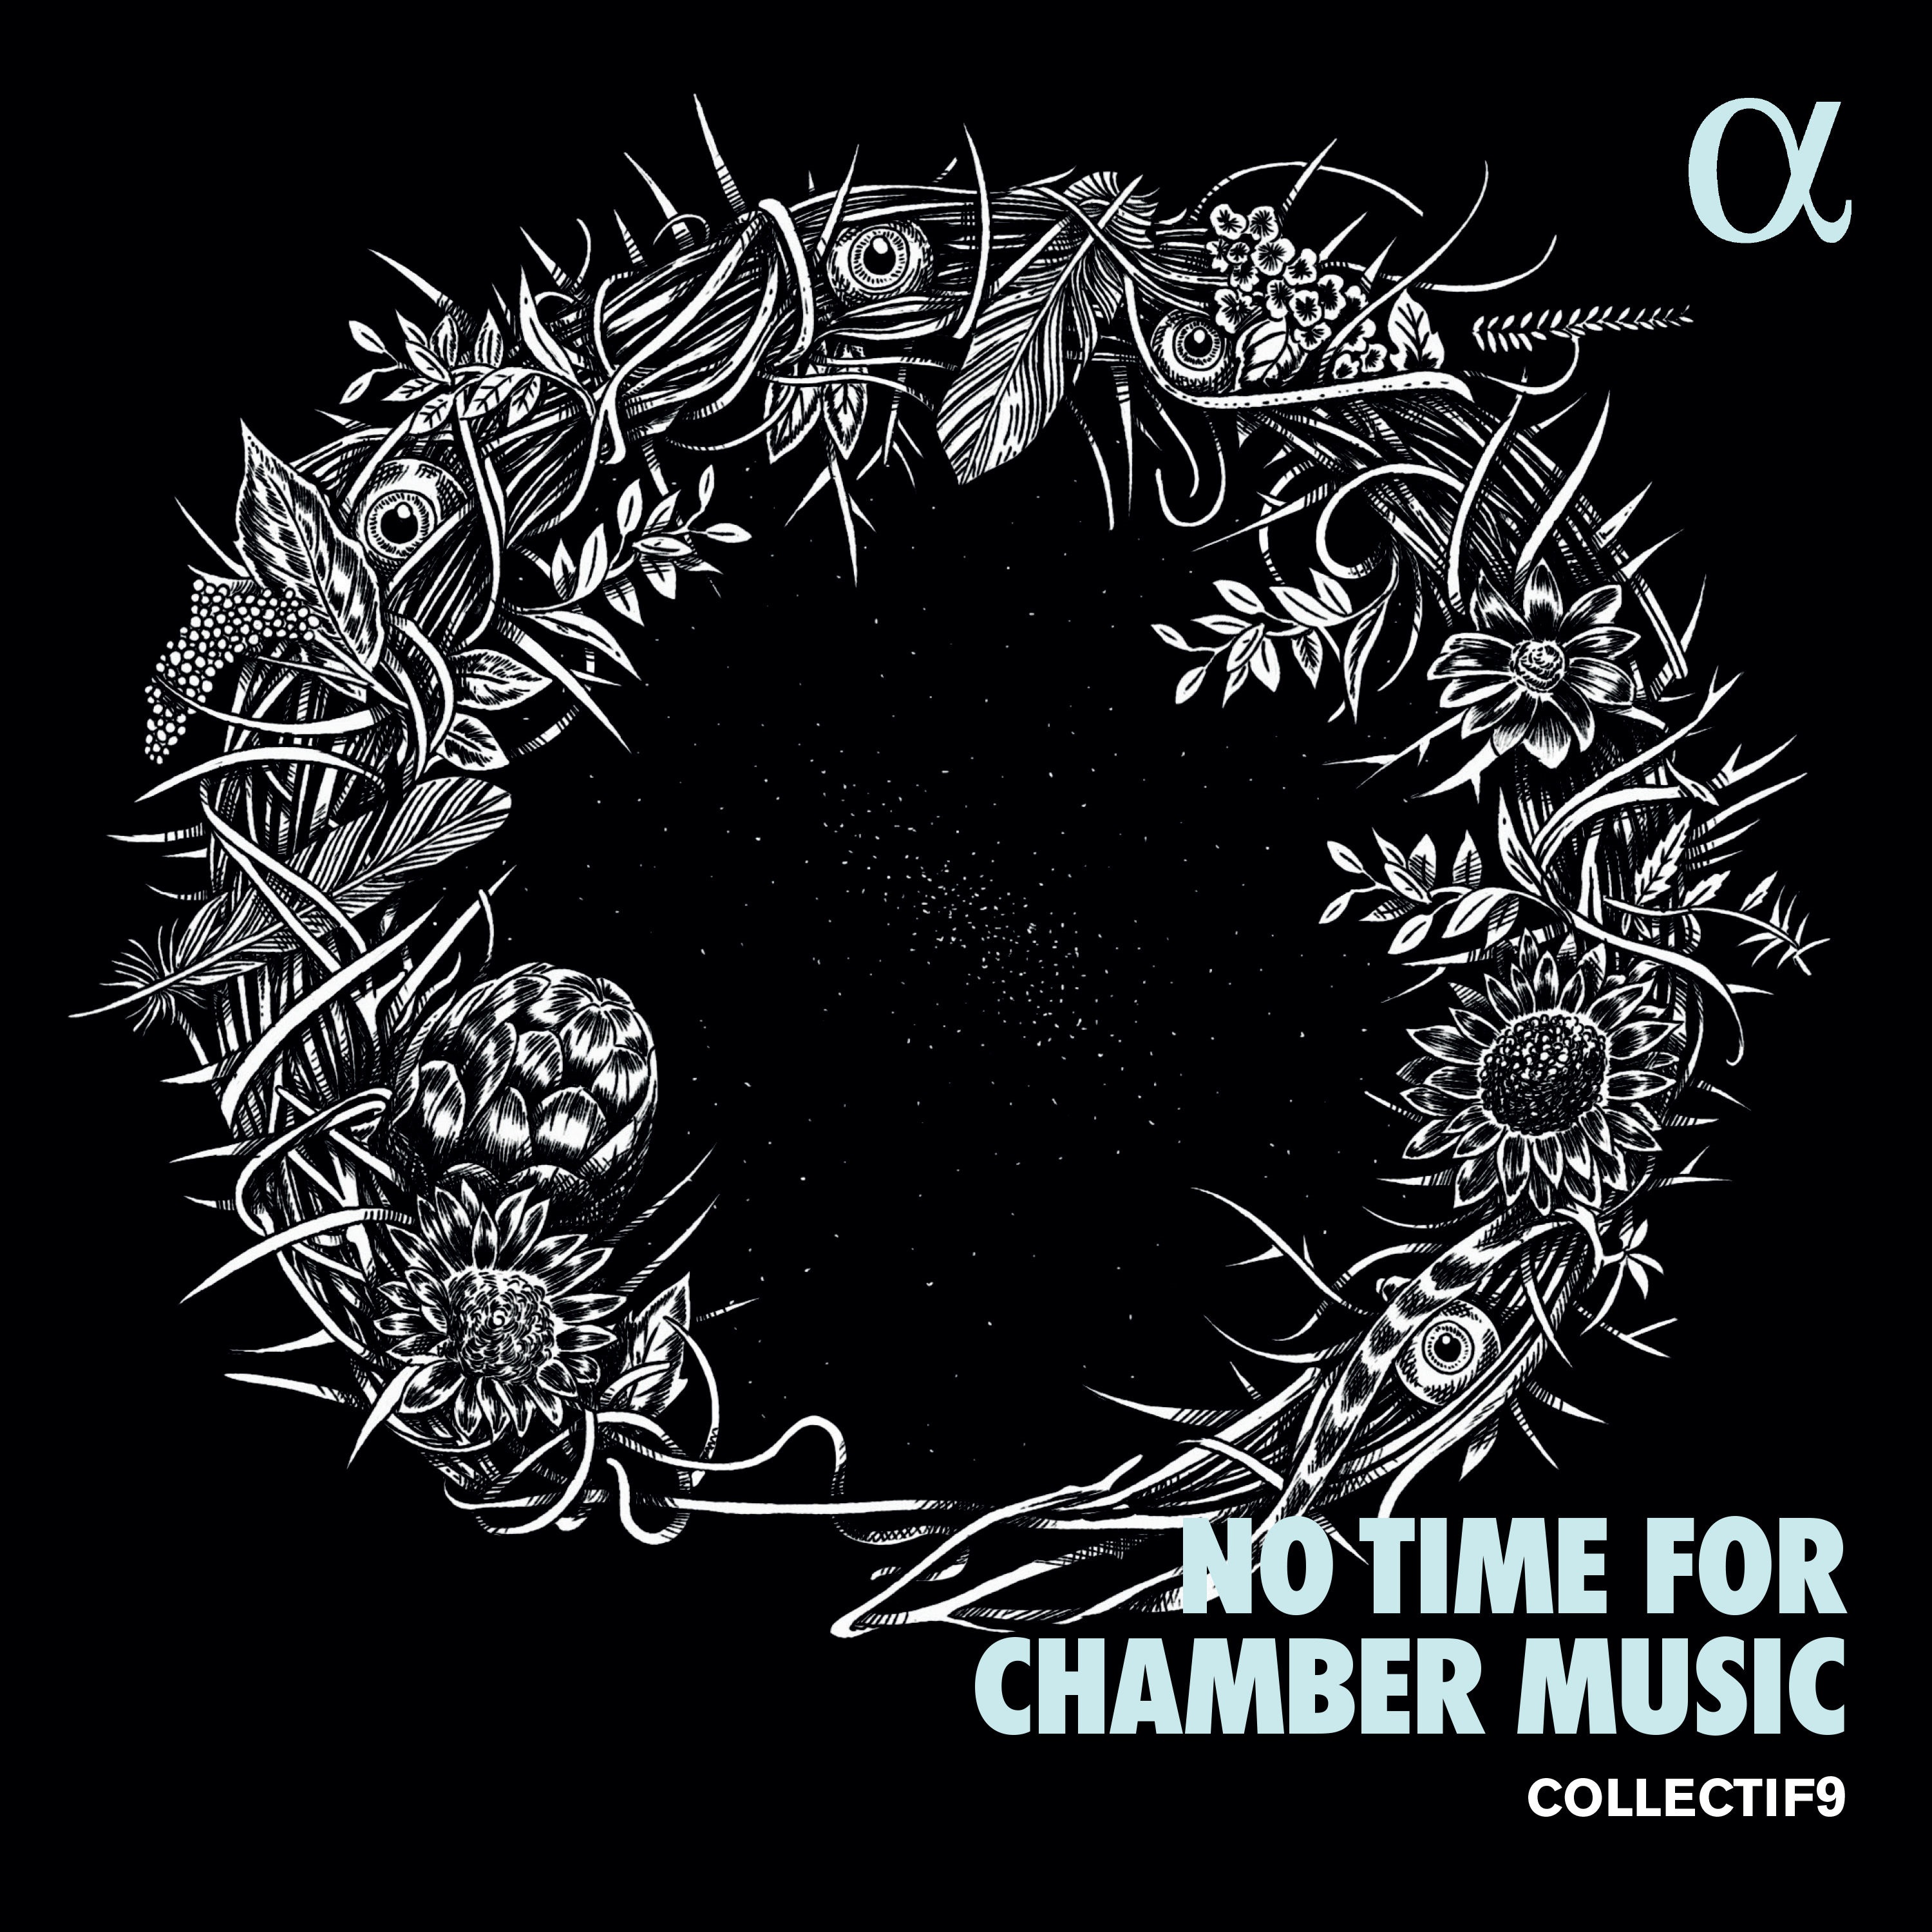 collectif9 – No Time for Chamber Music (2021) [FLAC 24bit/96kHz]